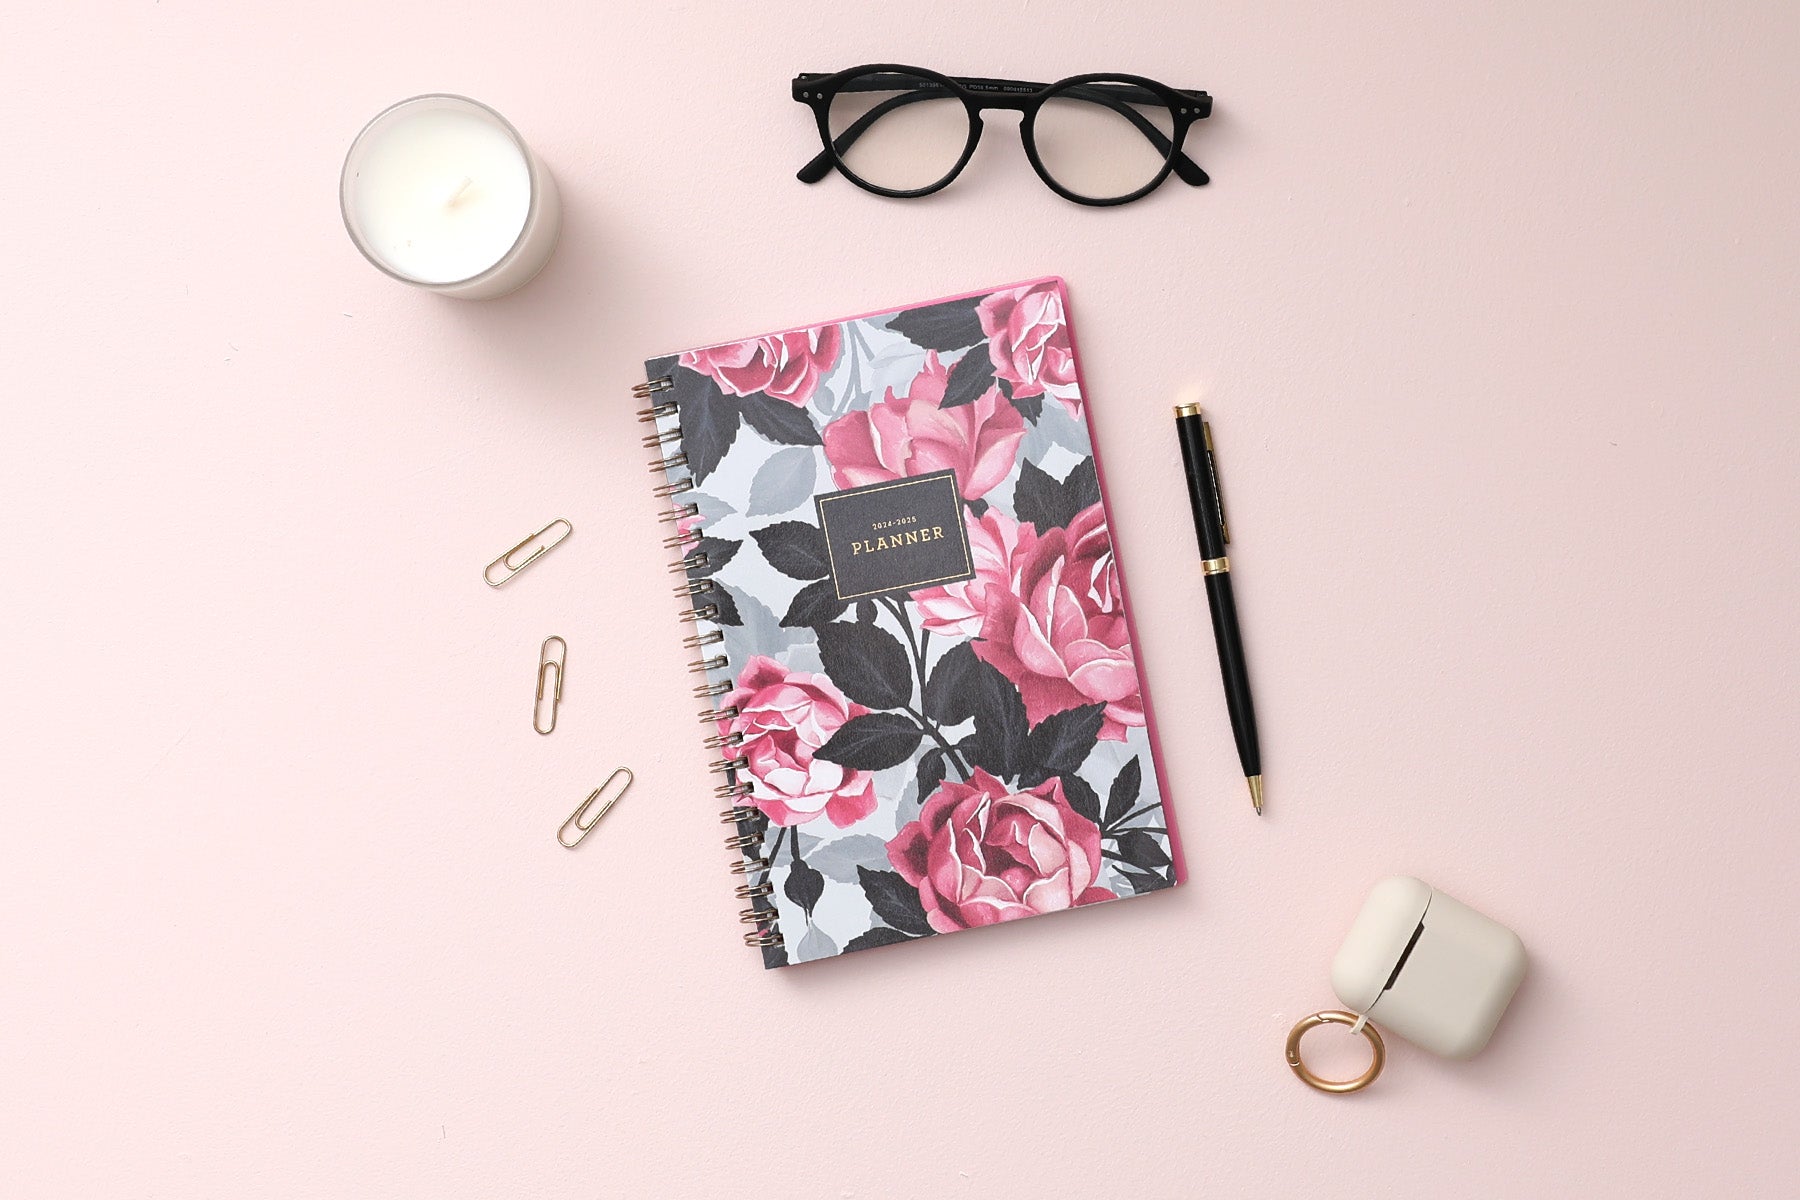 weekly monthly academic planner featuring a pink roses, shaded rose pedals, gold twin wire-o binding, and a compact 5x8 planner size, airpods, pen, paperclips, glasses, and candle on the side.